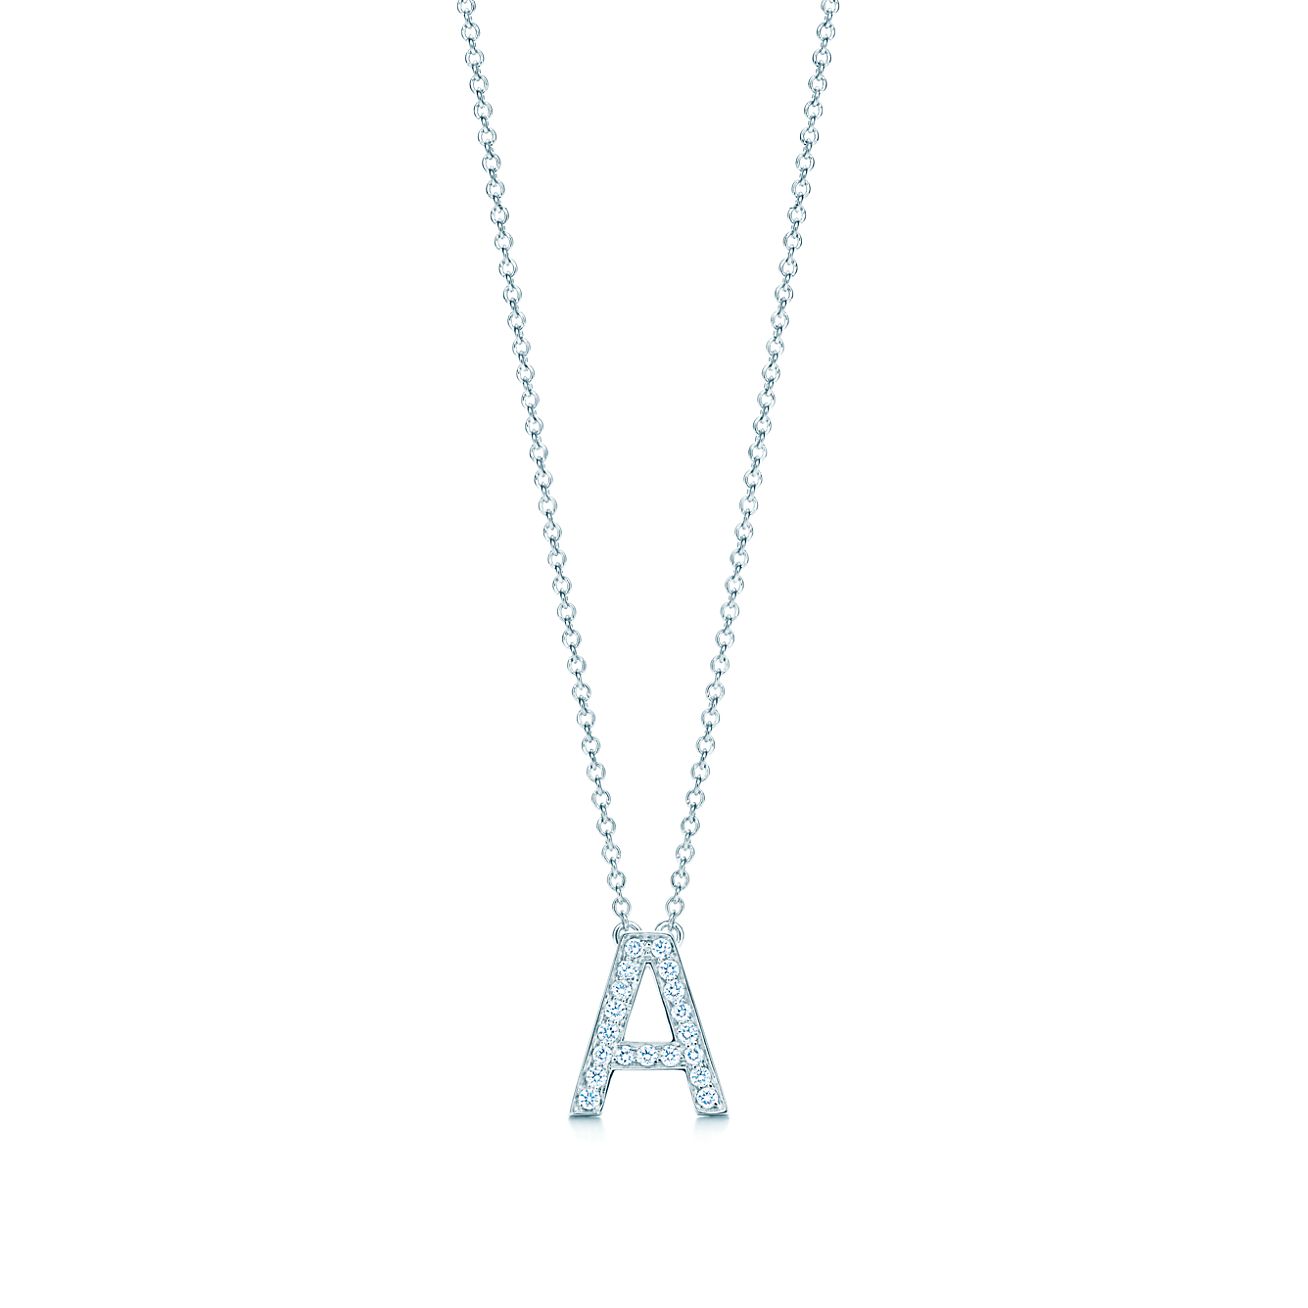 Tiffany Letters Pendant Of Diamonds In Platinum Mini Letters A Z Available Tiffany Co